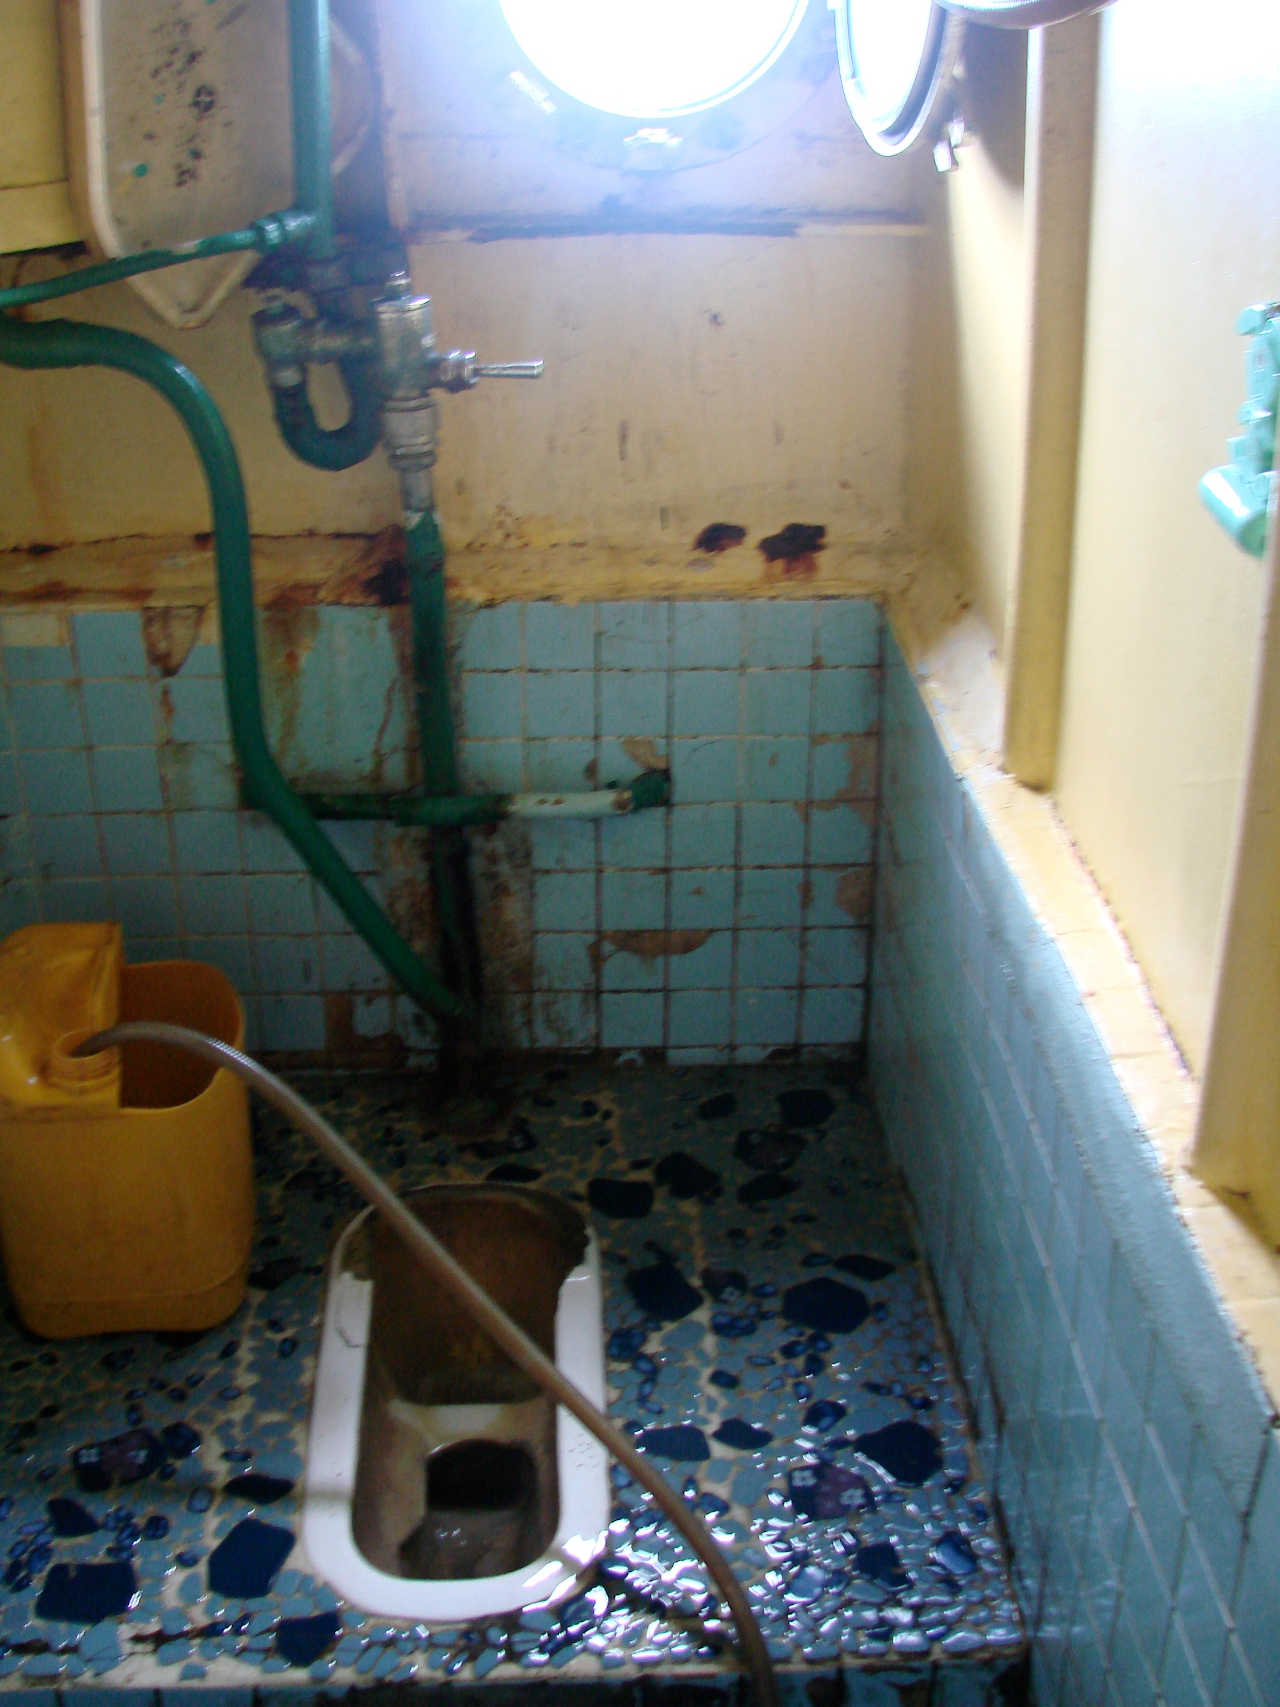 A shabby looking squat toilet